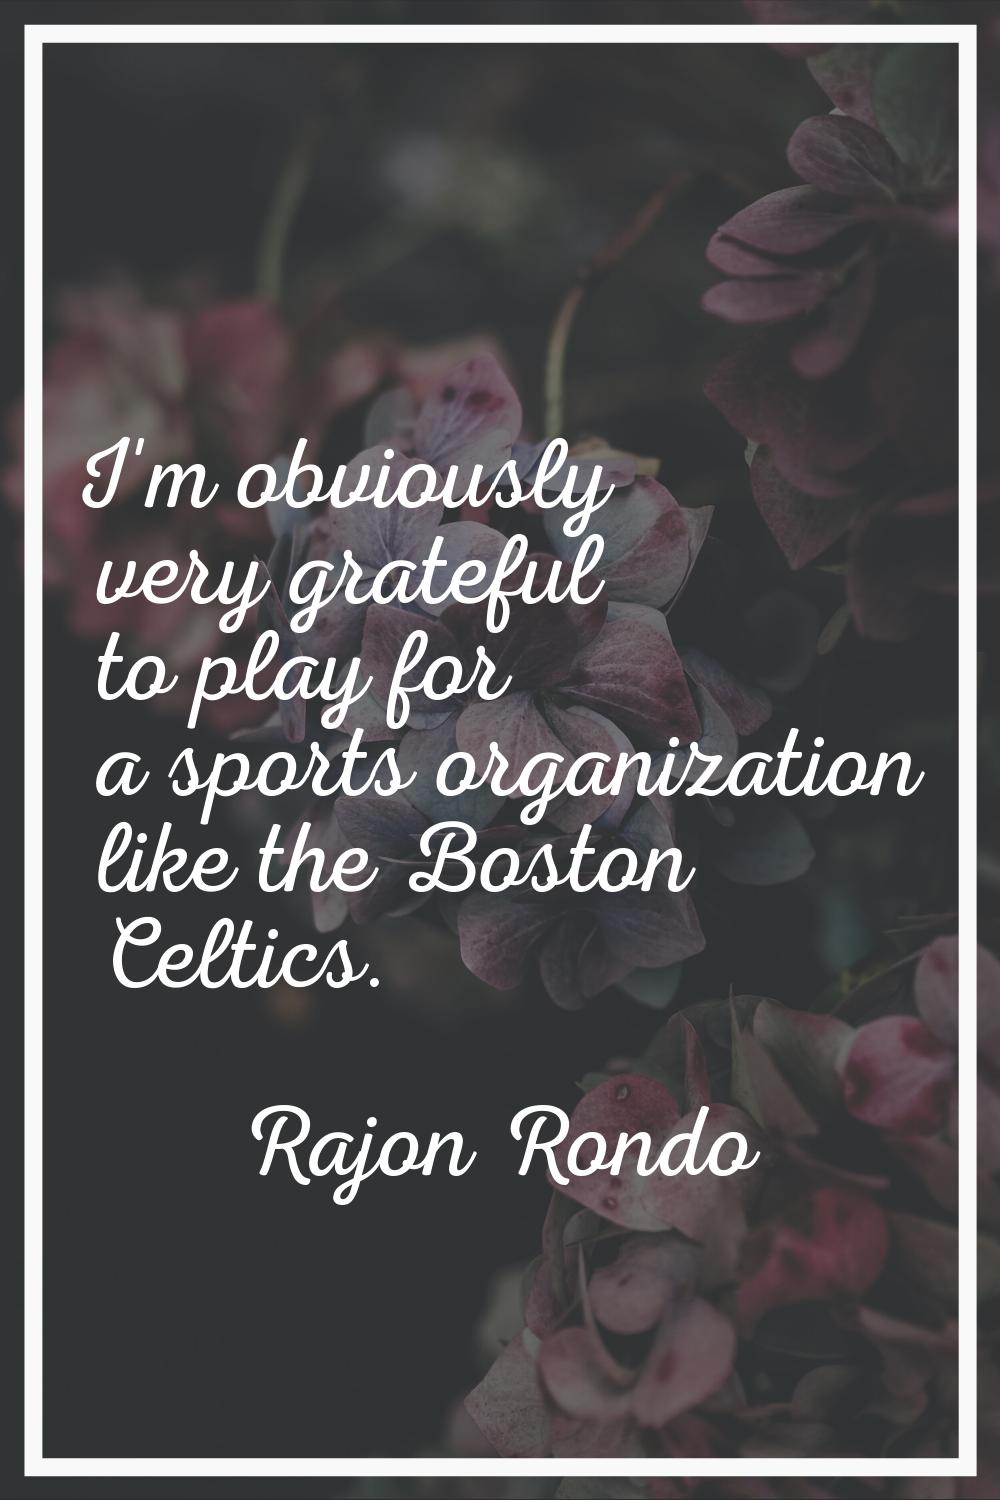 I'm obviously very grateful to play for a sports organization like the Boston Celtics.